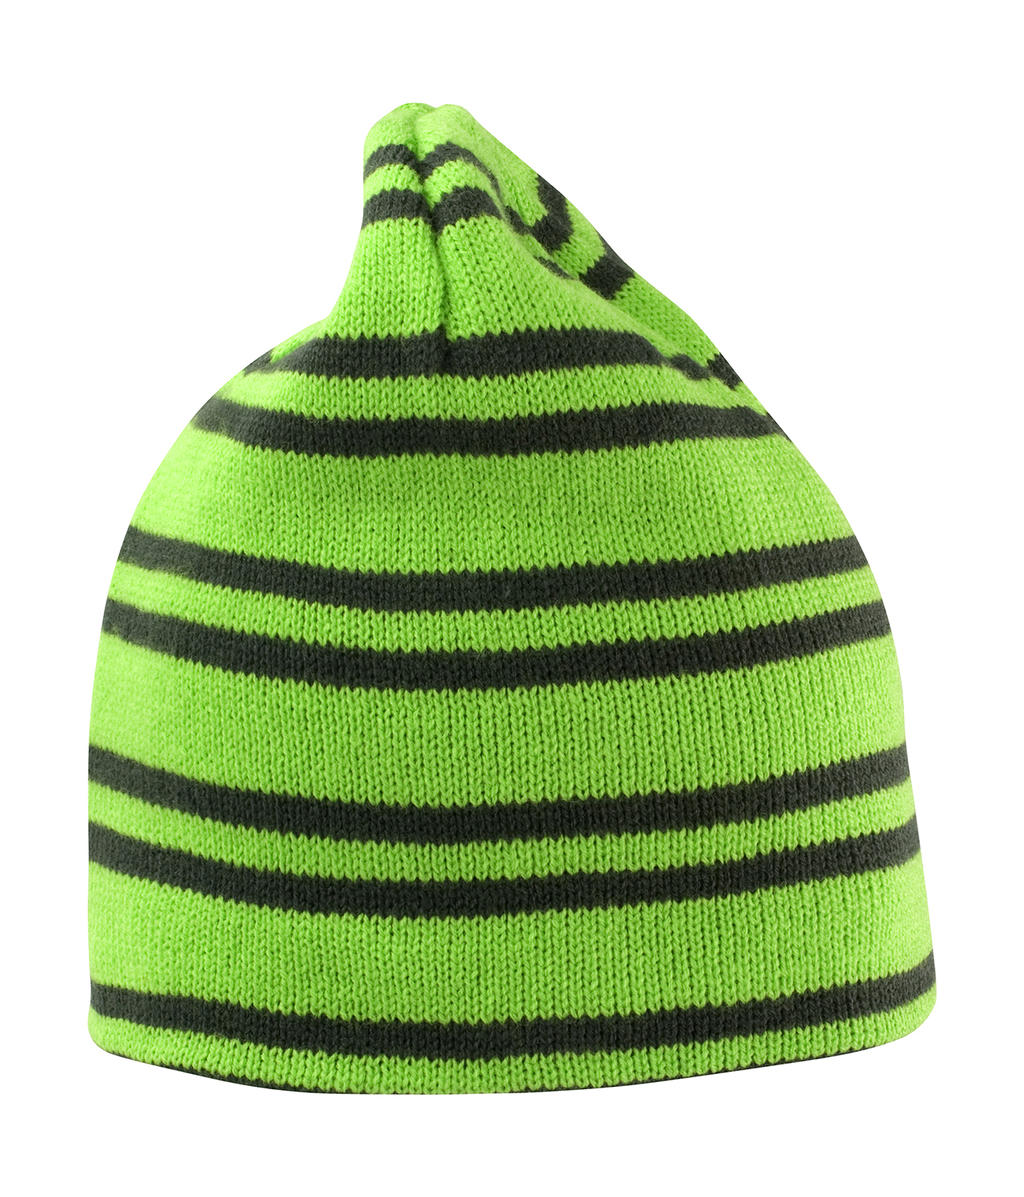  Team Reversible Beanie in Farbe Lime/Grey/Grey